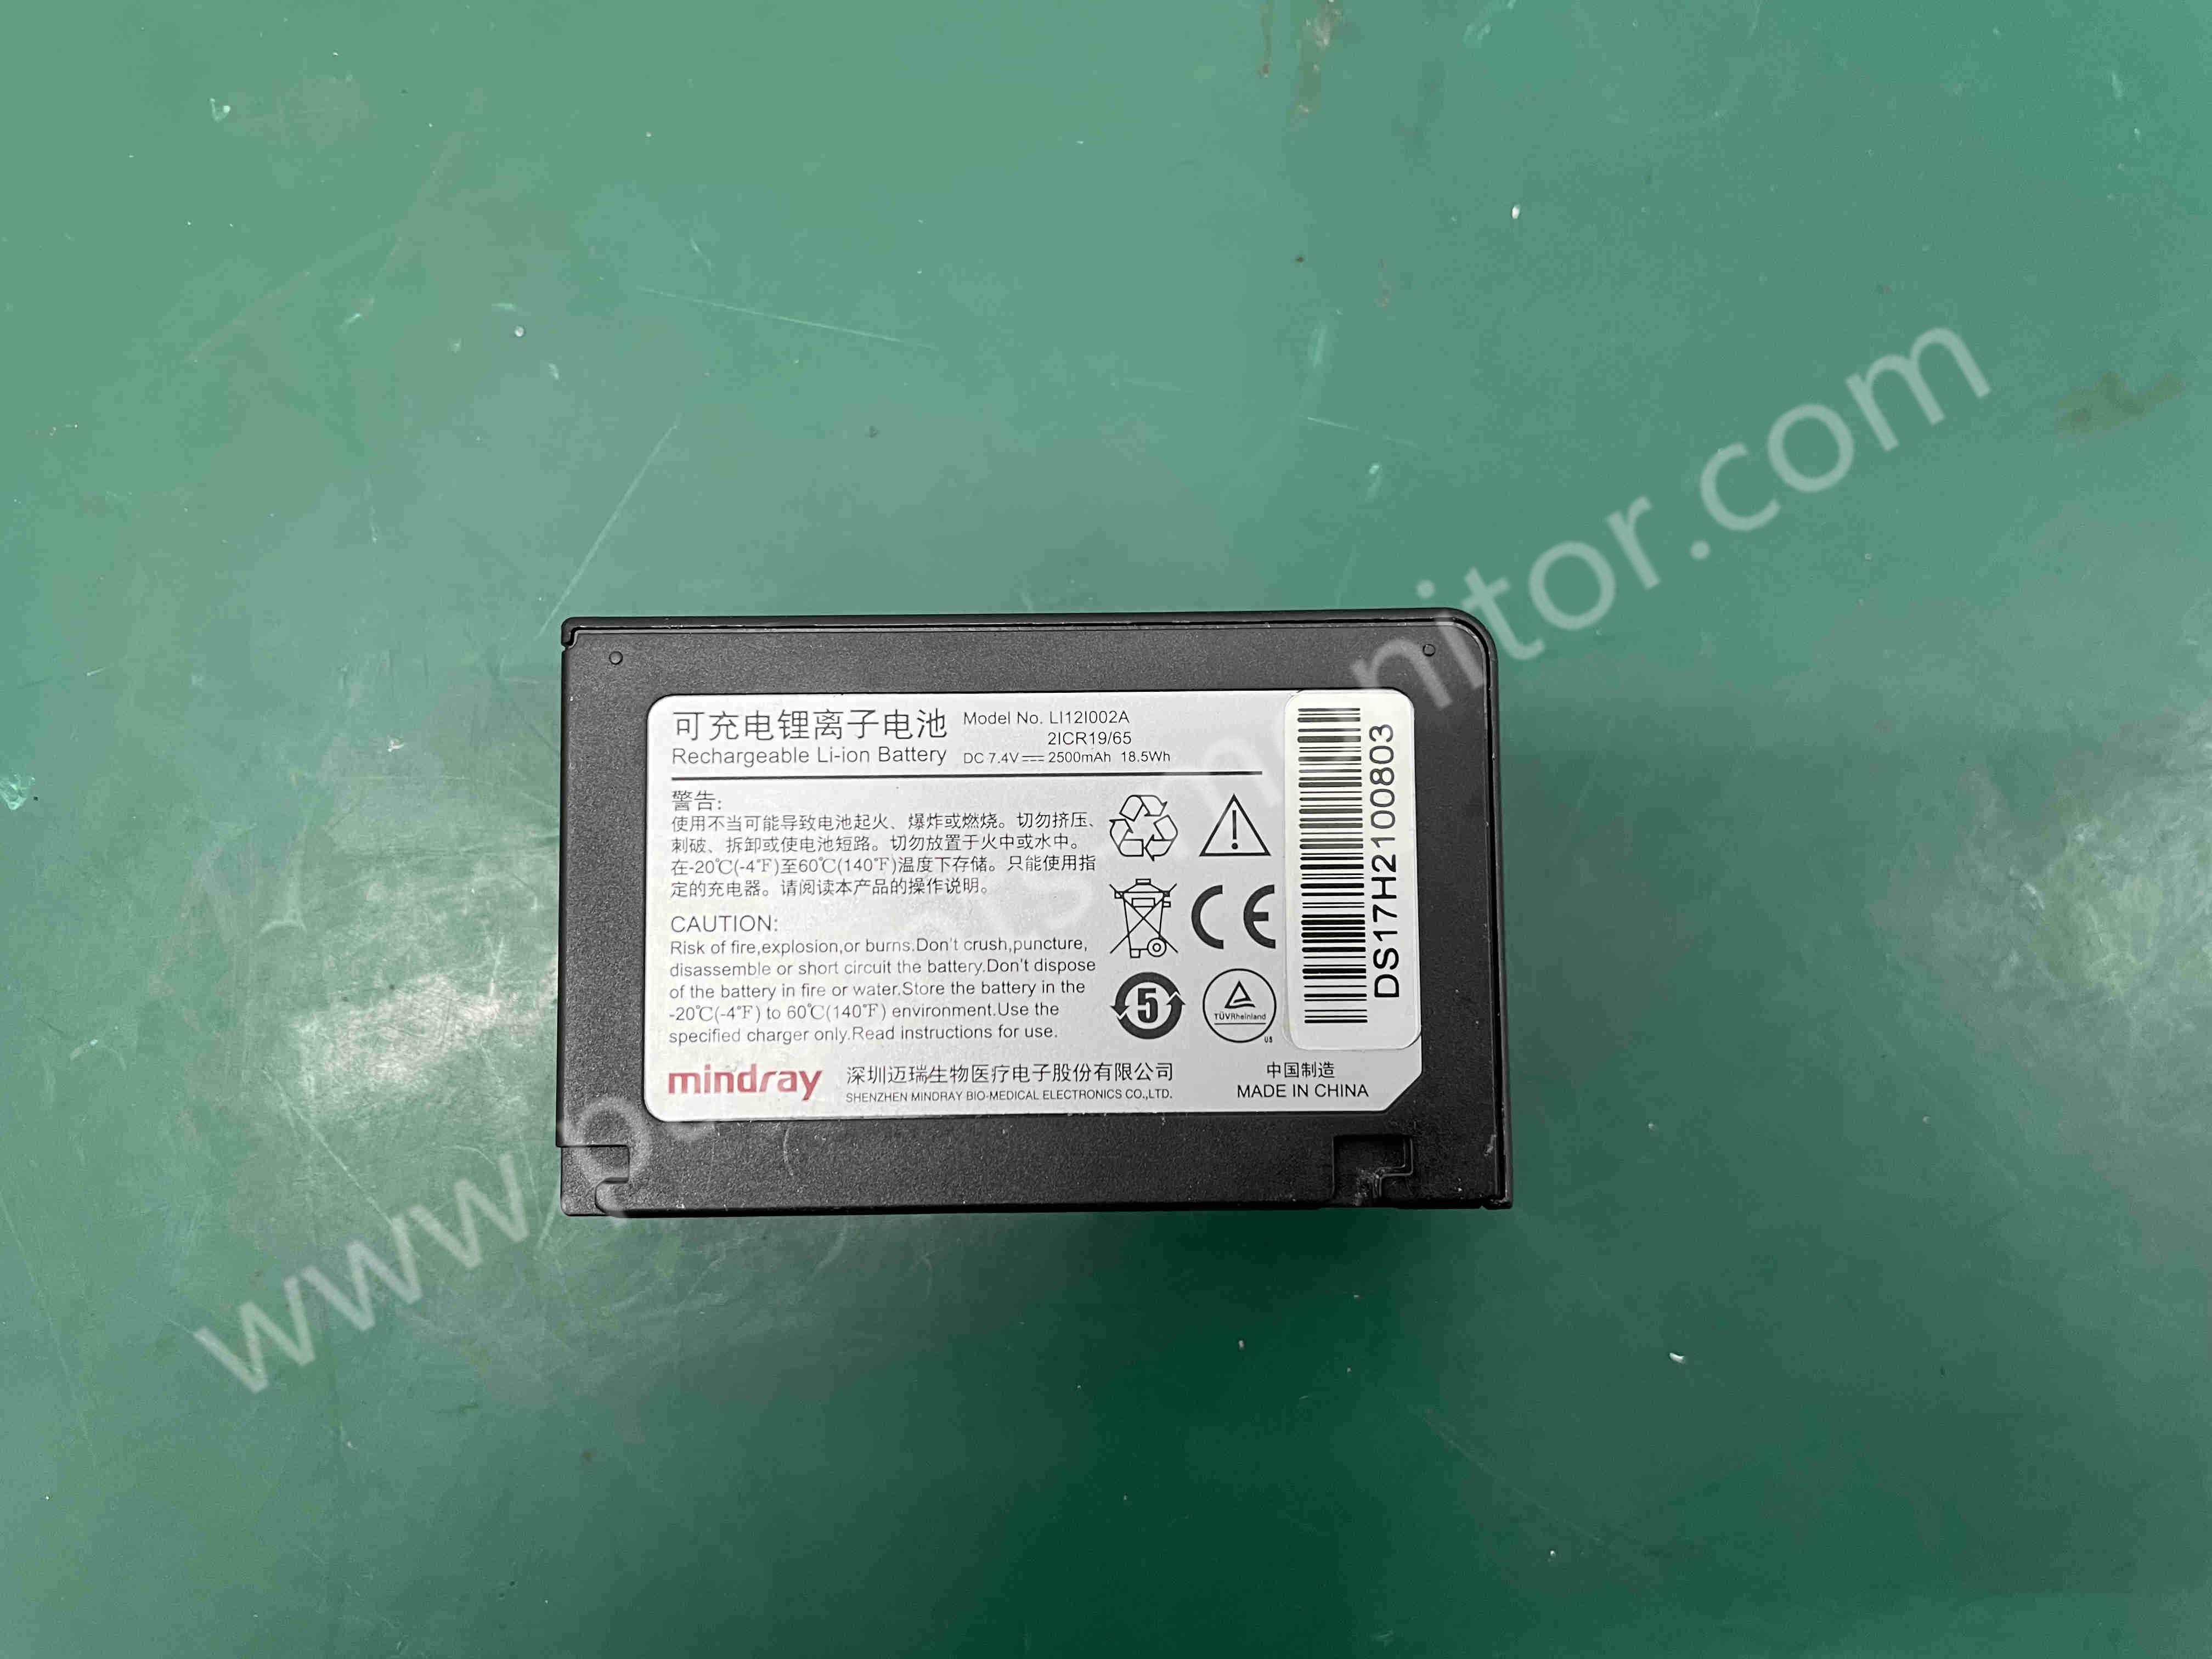  Mindray BeneVew T1 Patient Monitor parts Rechargeable Li-Ion Battery LI12I002A 7.4V 2500mAh 18.5Wh Manufactures